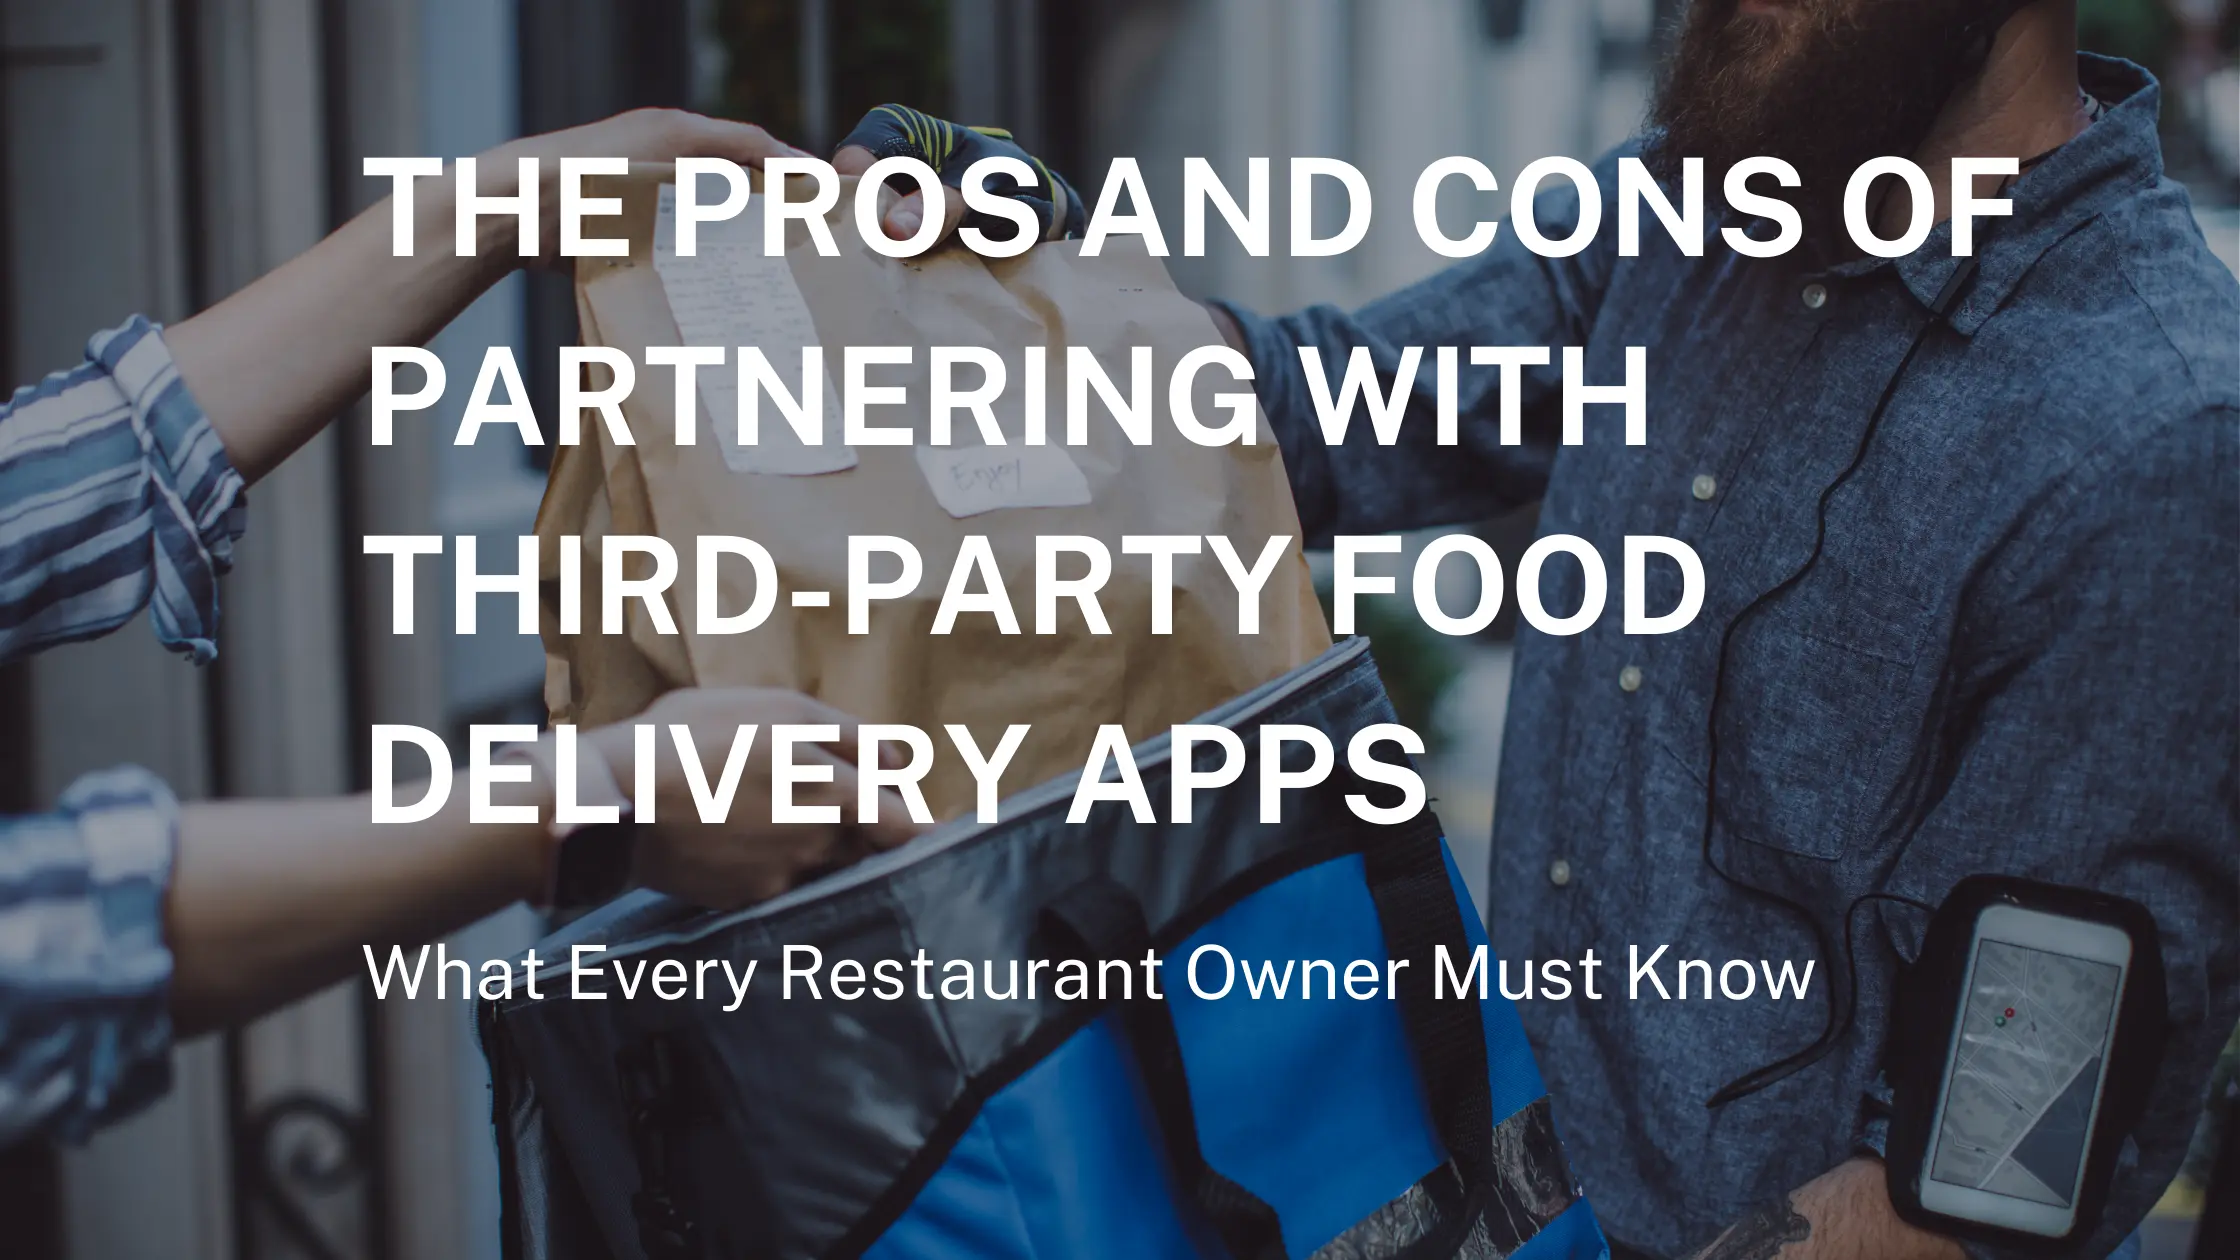 Restaurant operators partnering with Delivery apps 